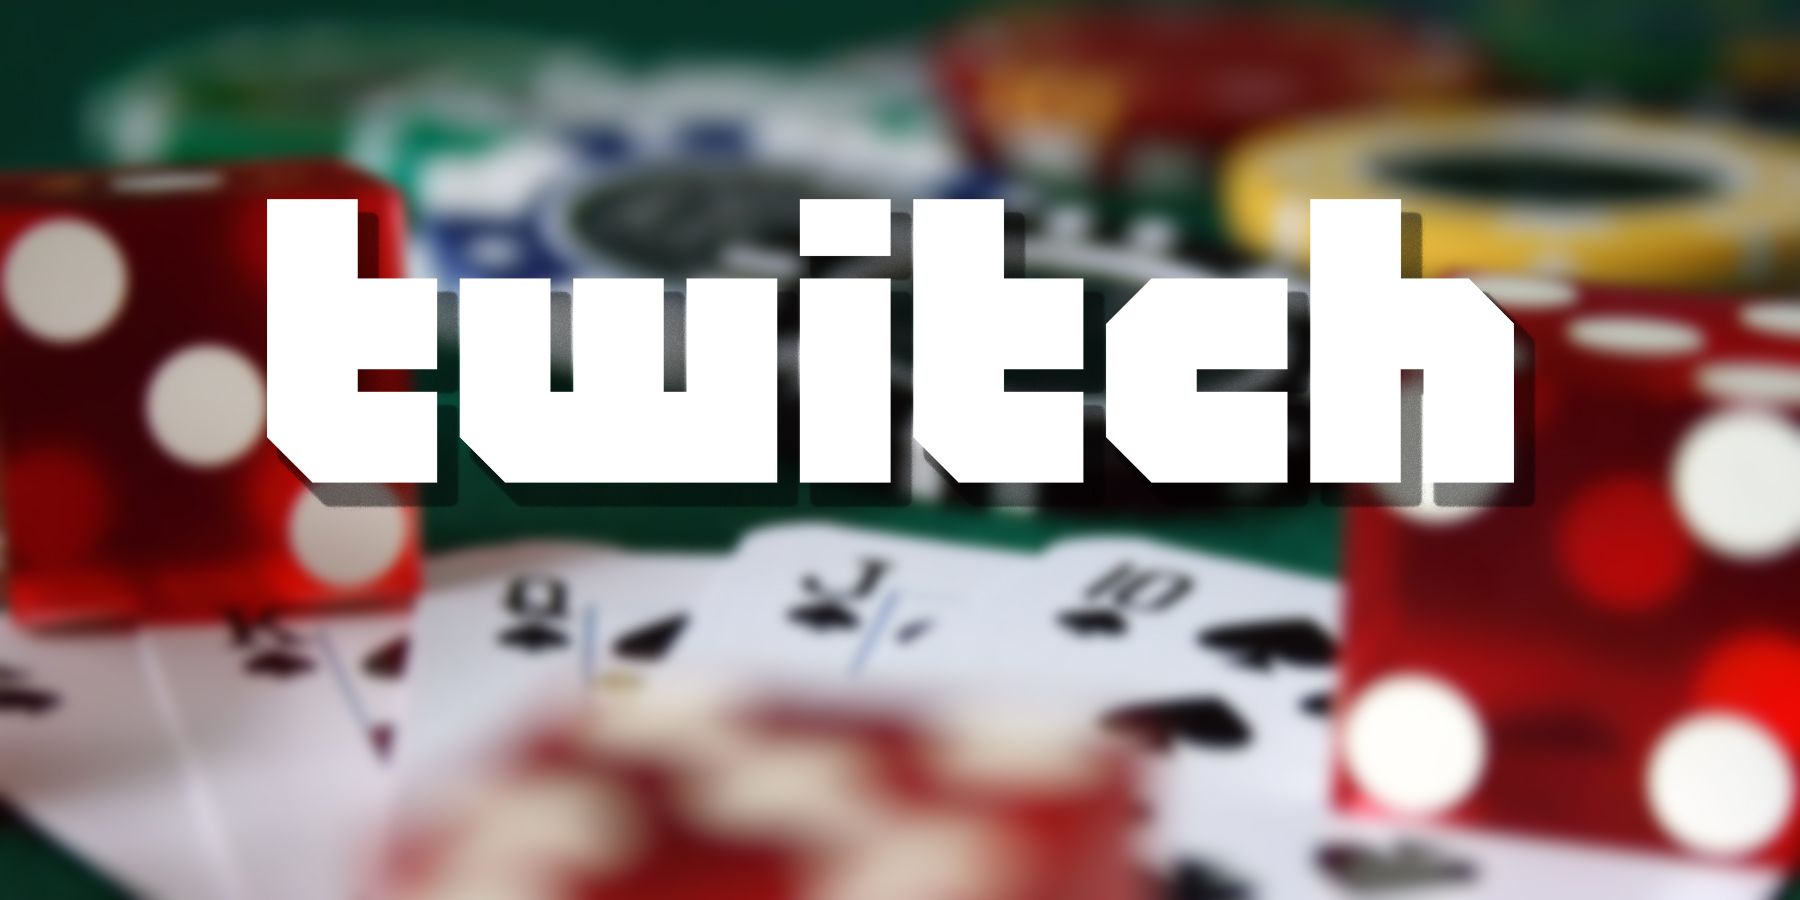 twitch gambling streams petition